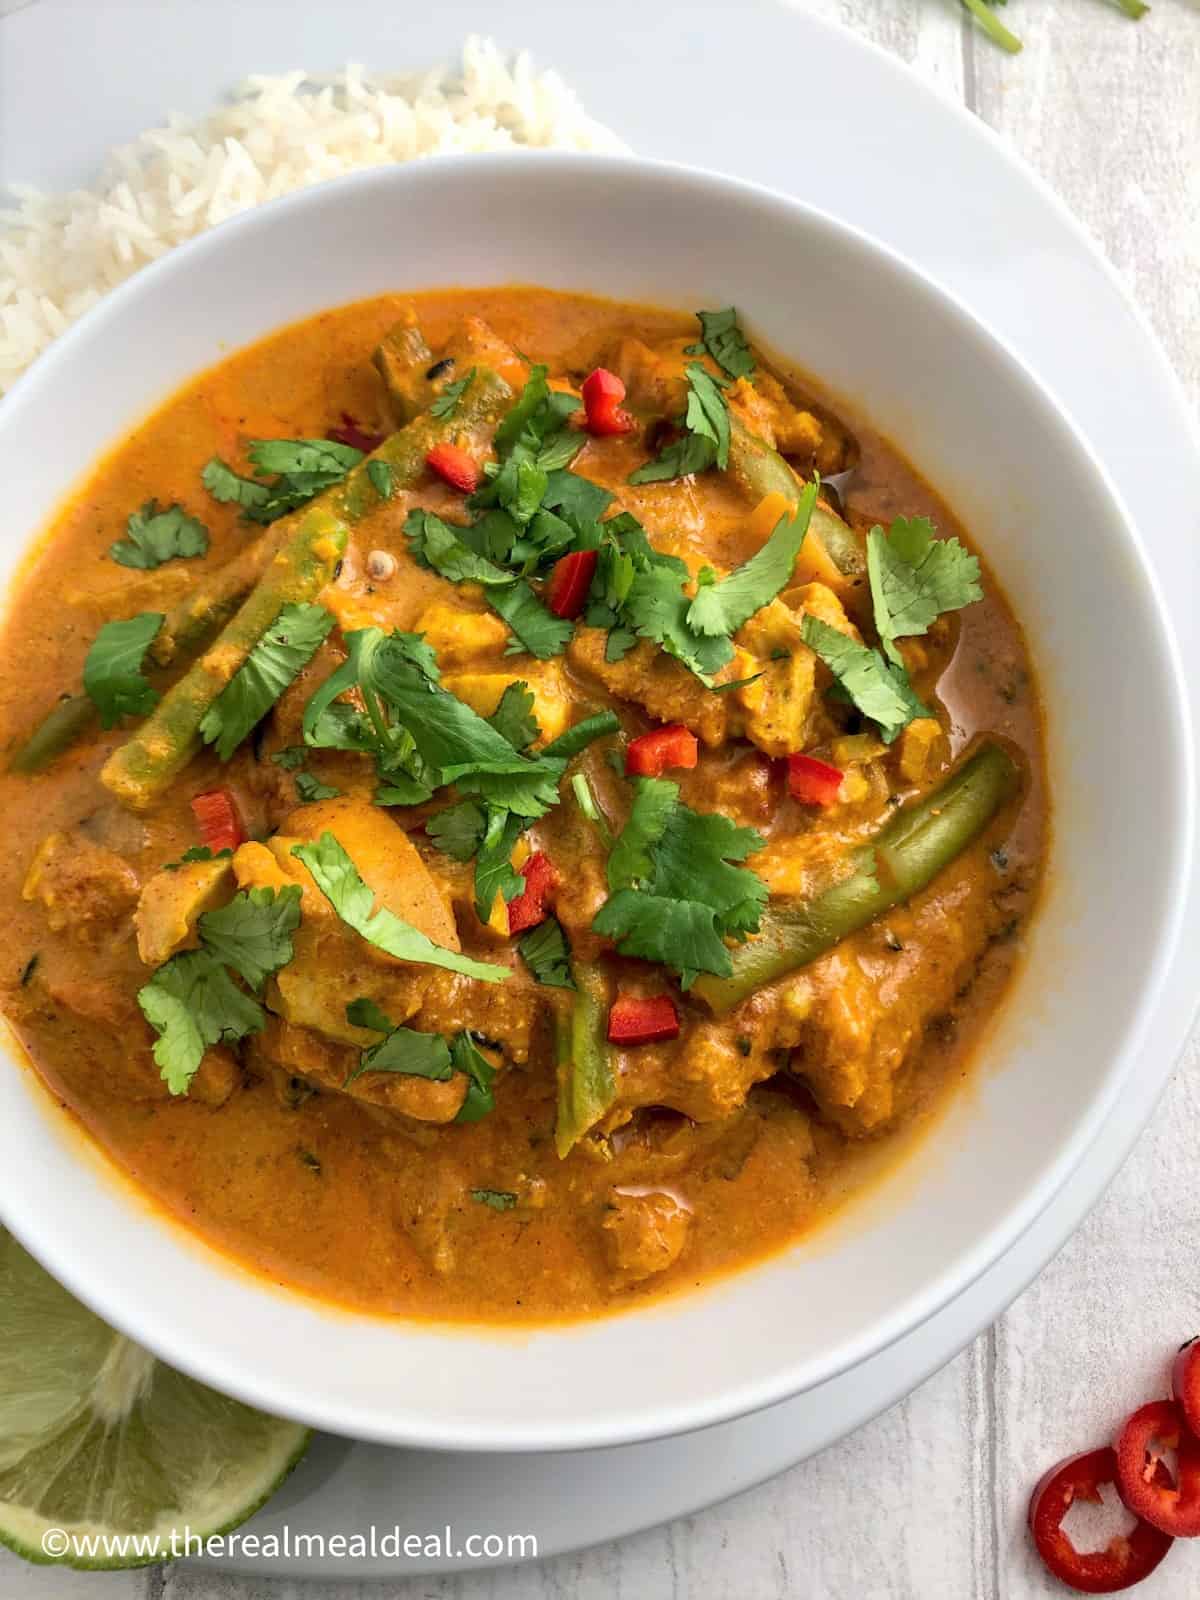 keralan fish curry in a bowl topped with fresh coriander leaves